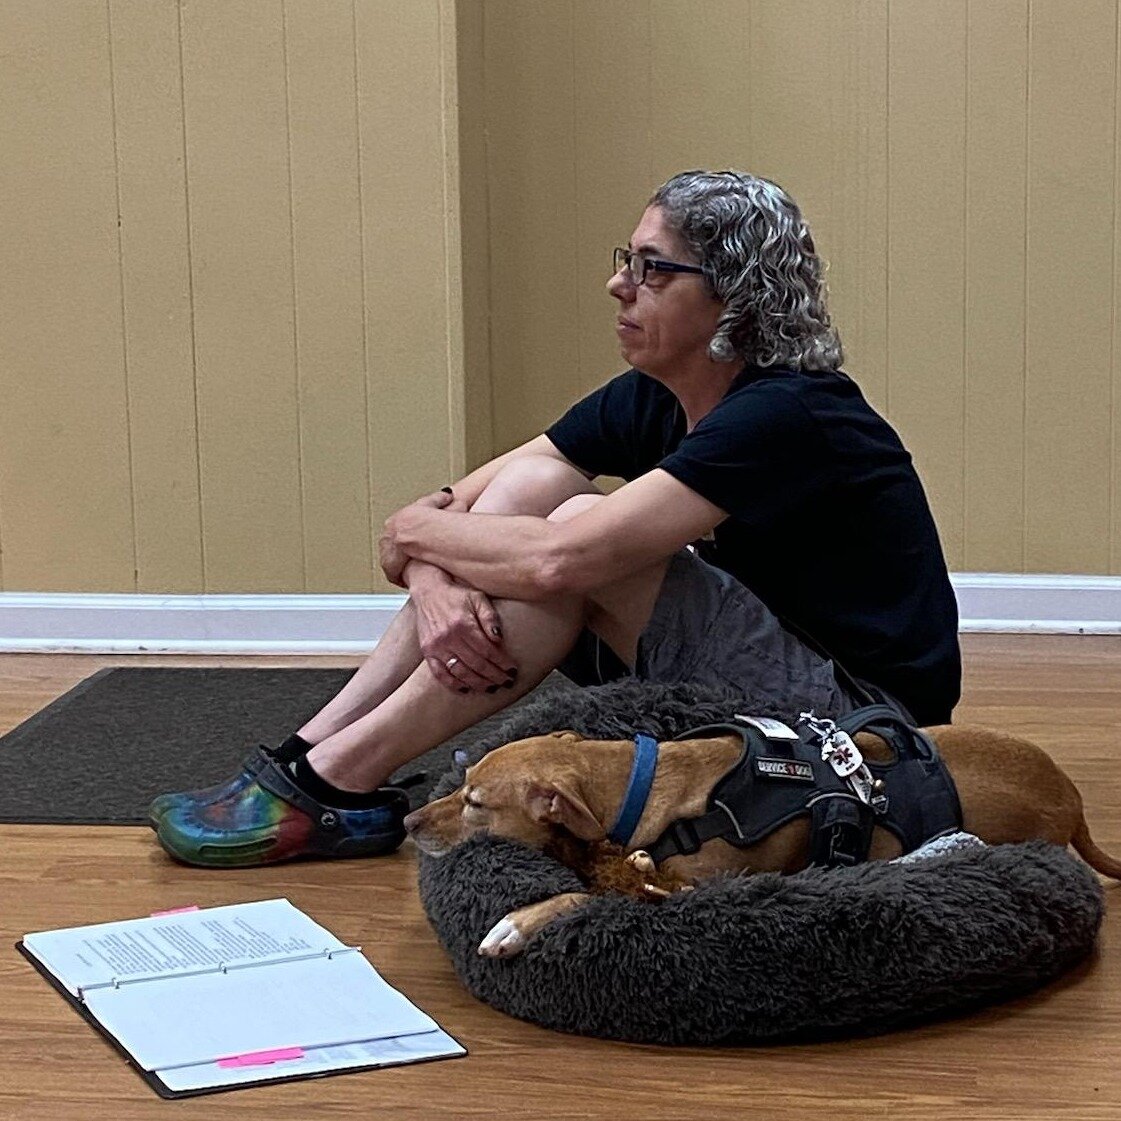 Deja Blue, Service Dog, calls lines at the Leading Ladies rehearsal, with Assistant Director Kyrie-Inn Blue. 

Deja reminds everyone to get your paws on these tickets before we completely sell out yet again! 

Performances for Leading Ladies are June